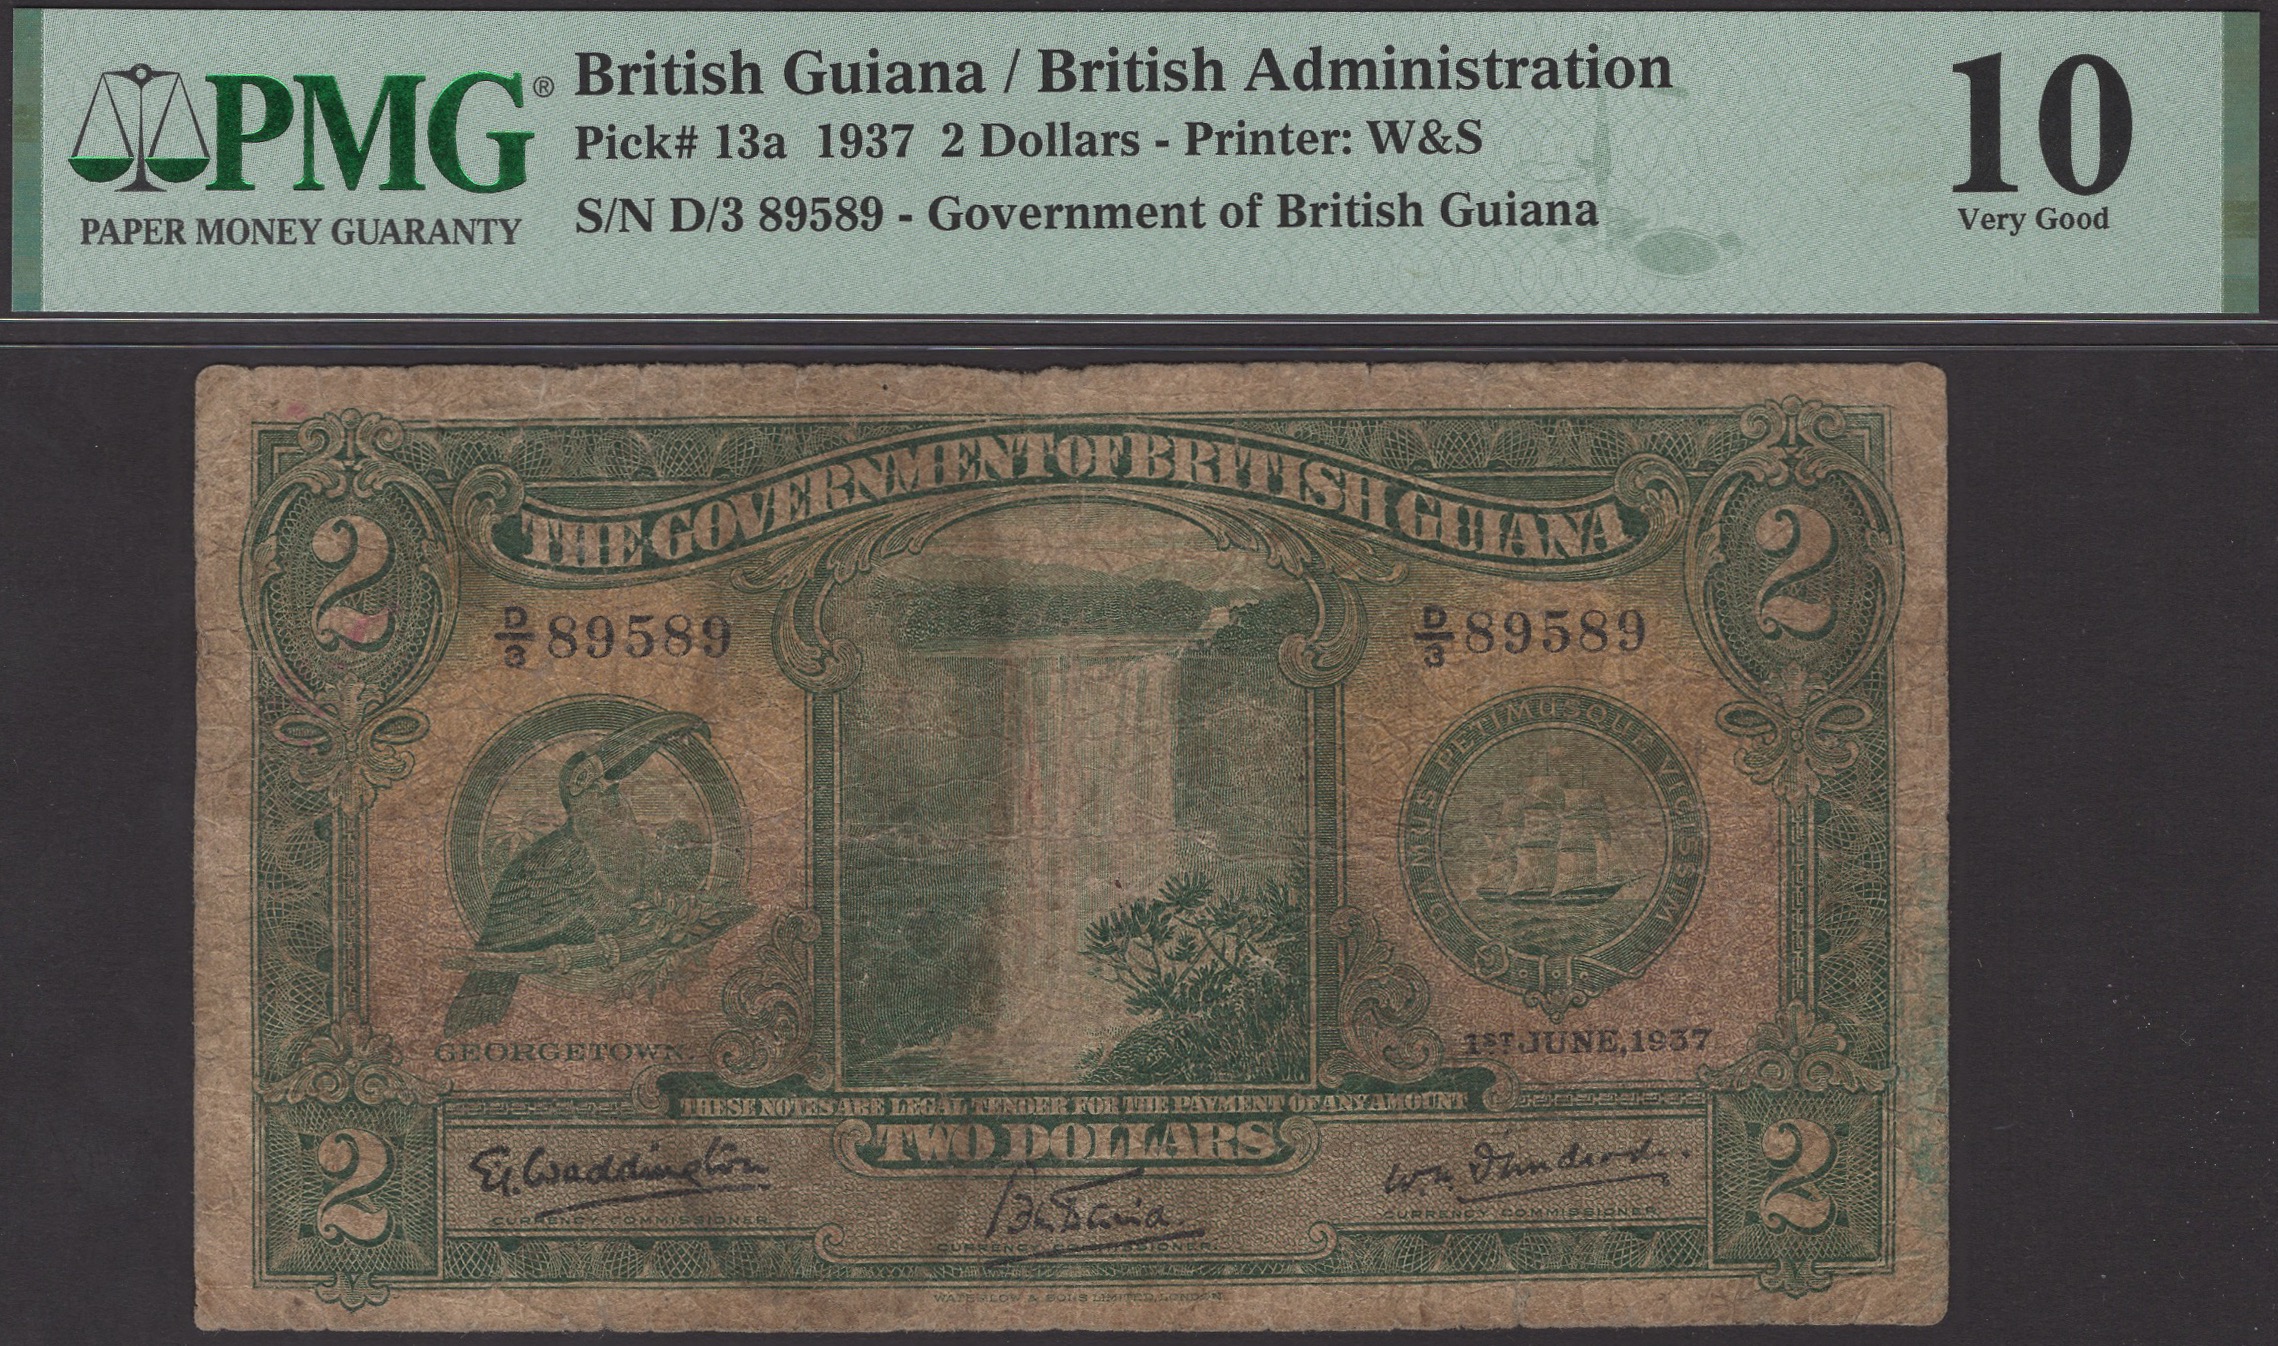 Government of British Guiana, $2, 1 June 1937, serial number D/3 89589, in PMG holder 10,...